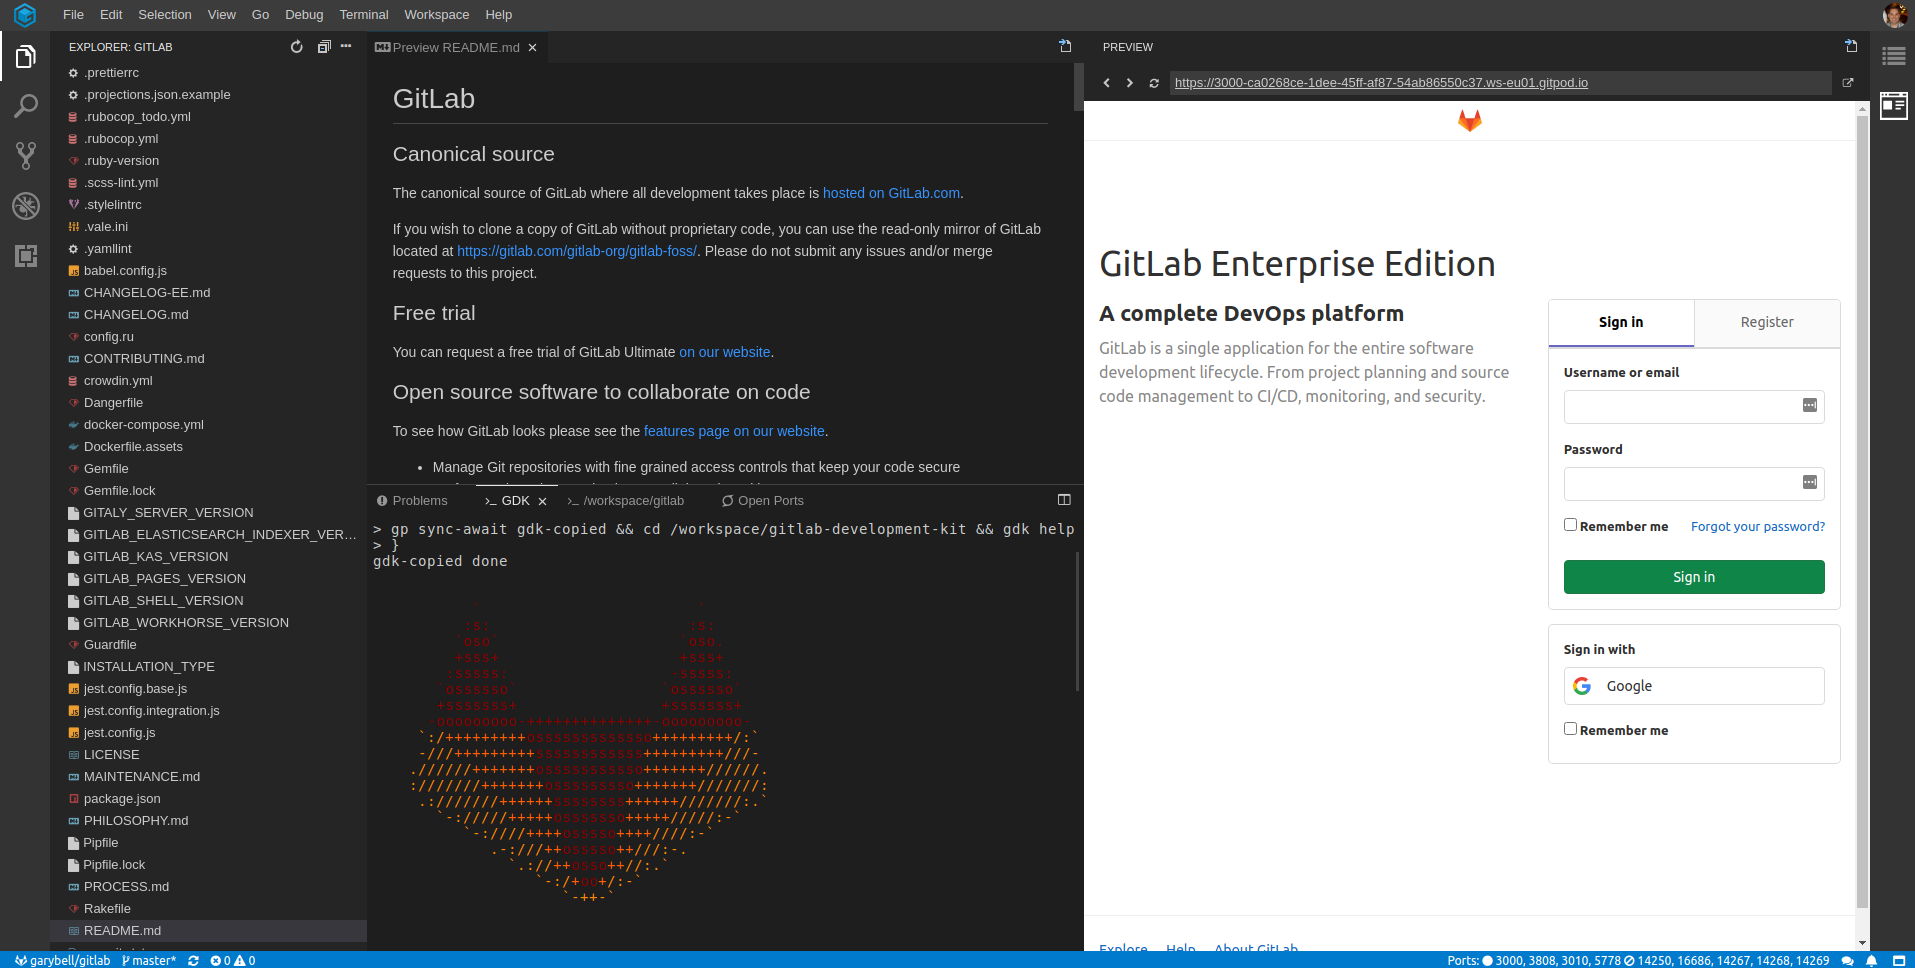 Getting started with GitLab's Cloud Development Kit